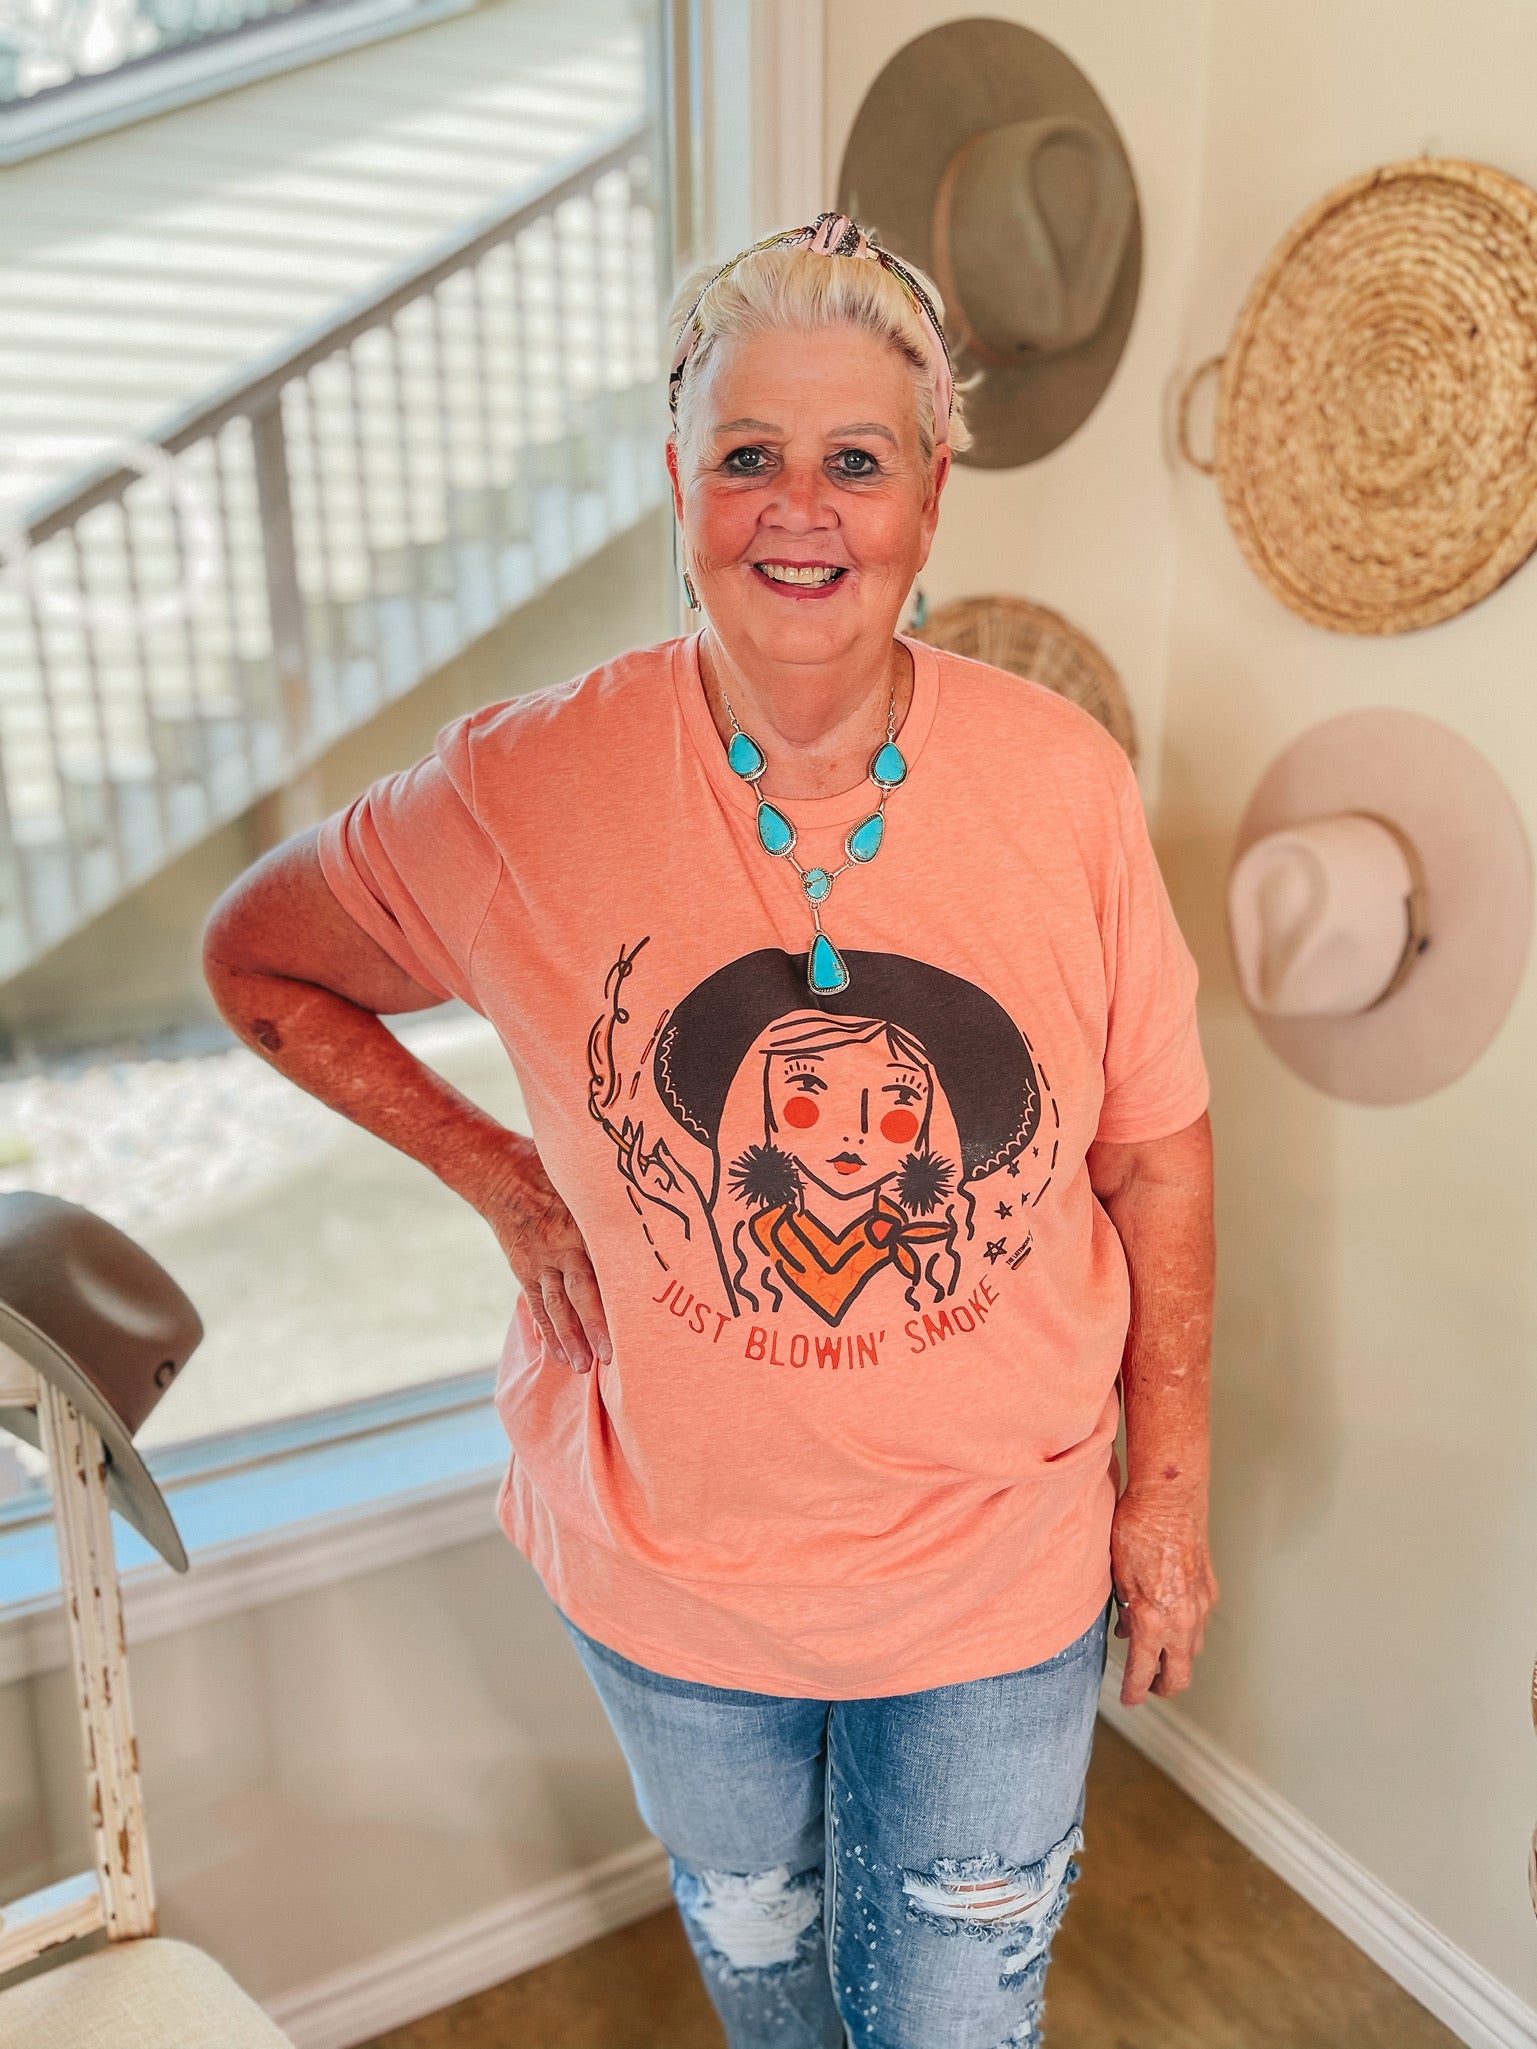 Just Blowin' Smoke Cowgirl Short Sleeve Graphic Tee in Peach - Giddy Up Glamour Boutique